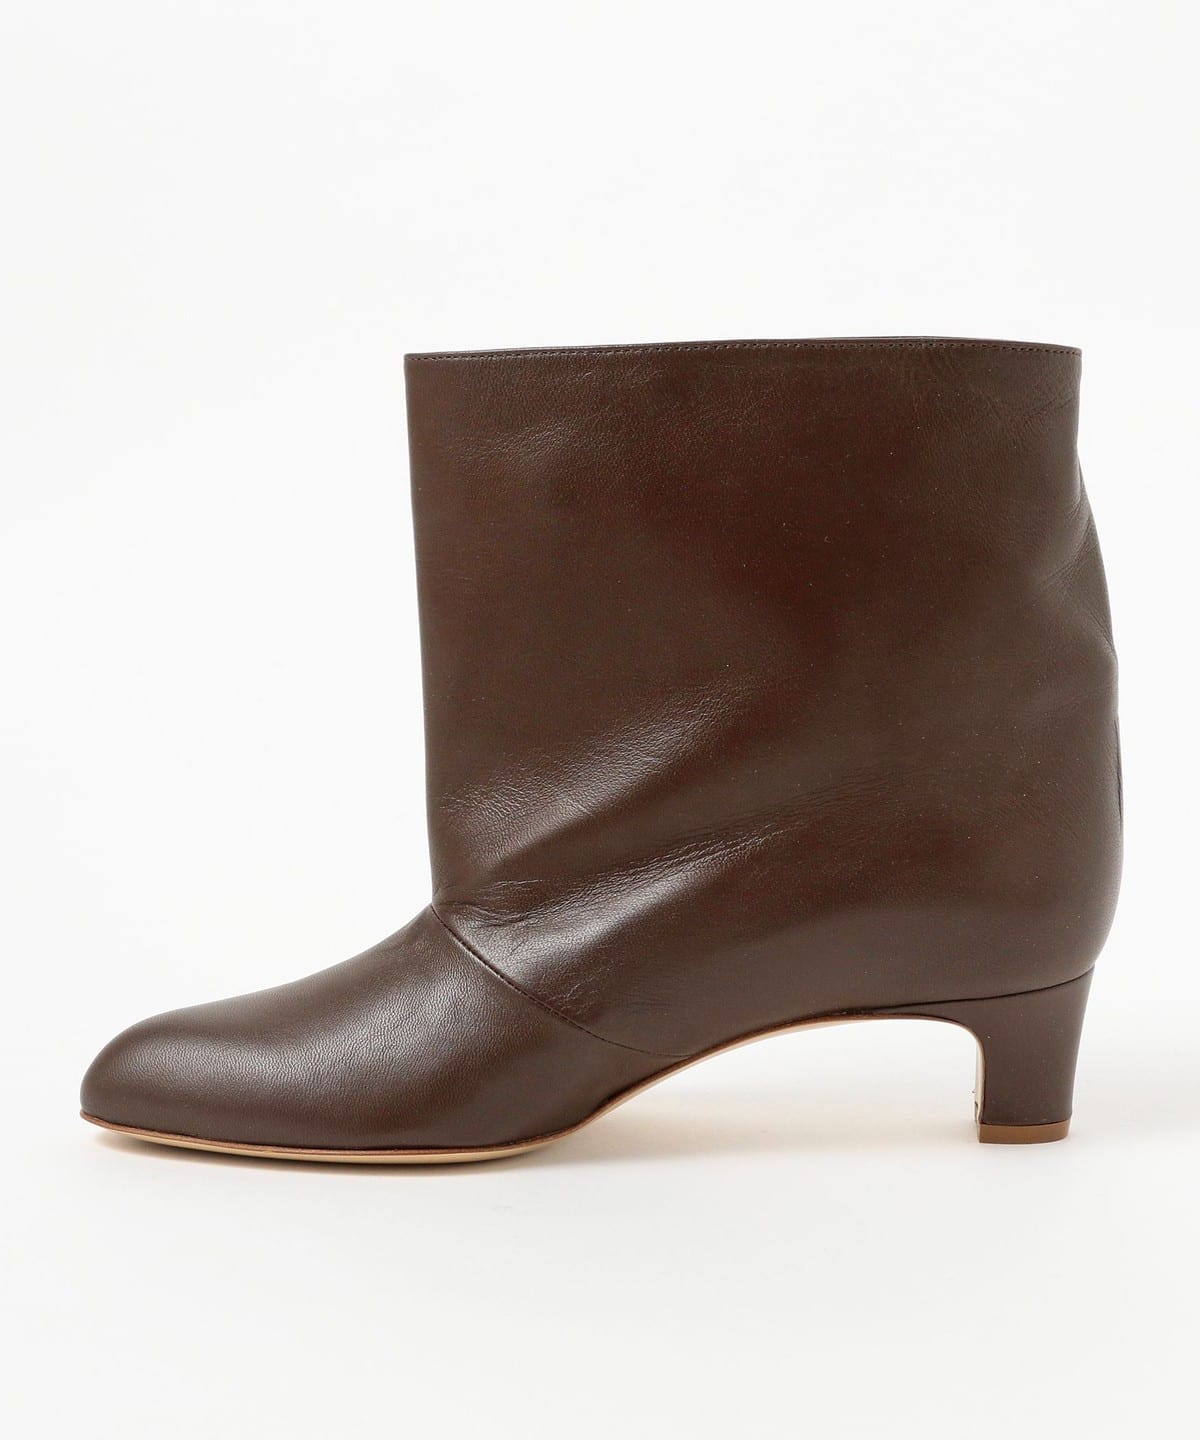 Demi-Luxe BEAMS NEBULONI E / Demi-Luxe BEAMS short boots (shoes  boots/booties) mail order | BEAMS